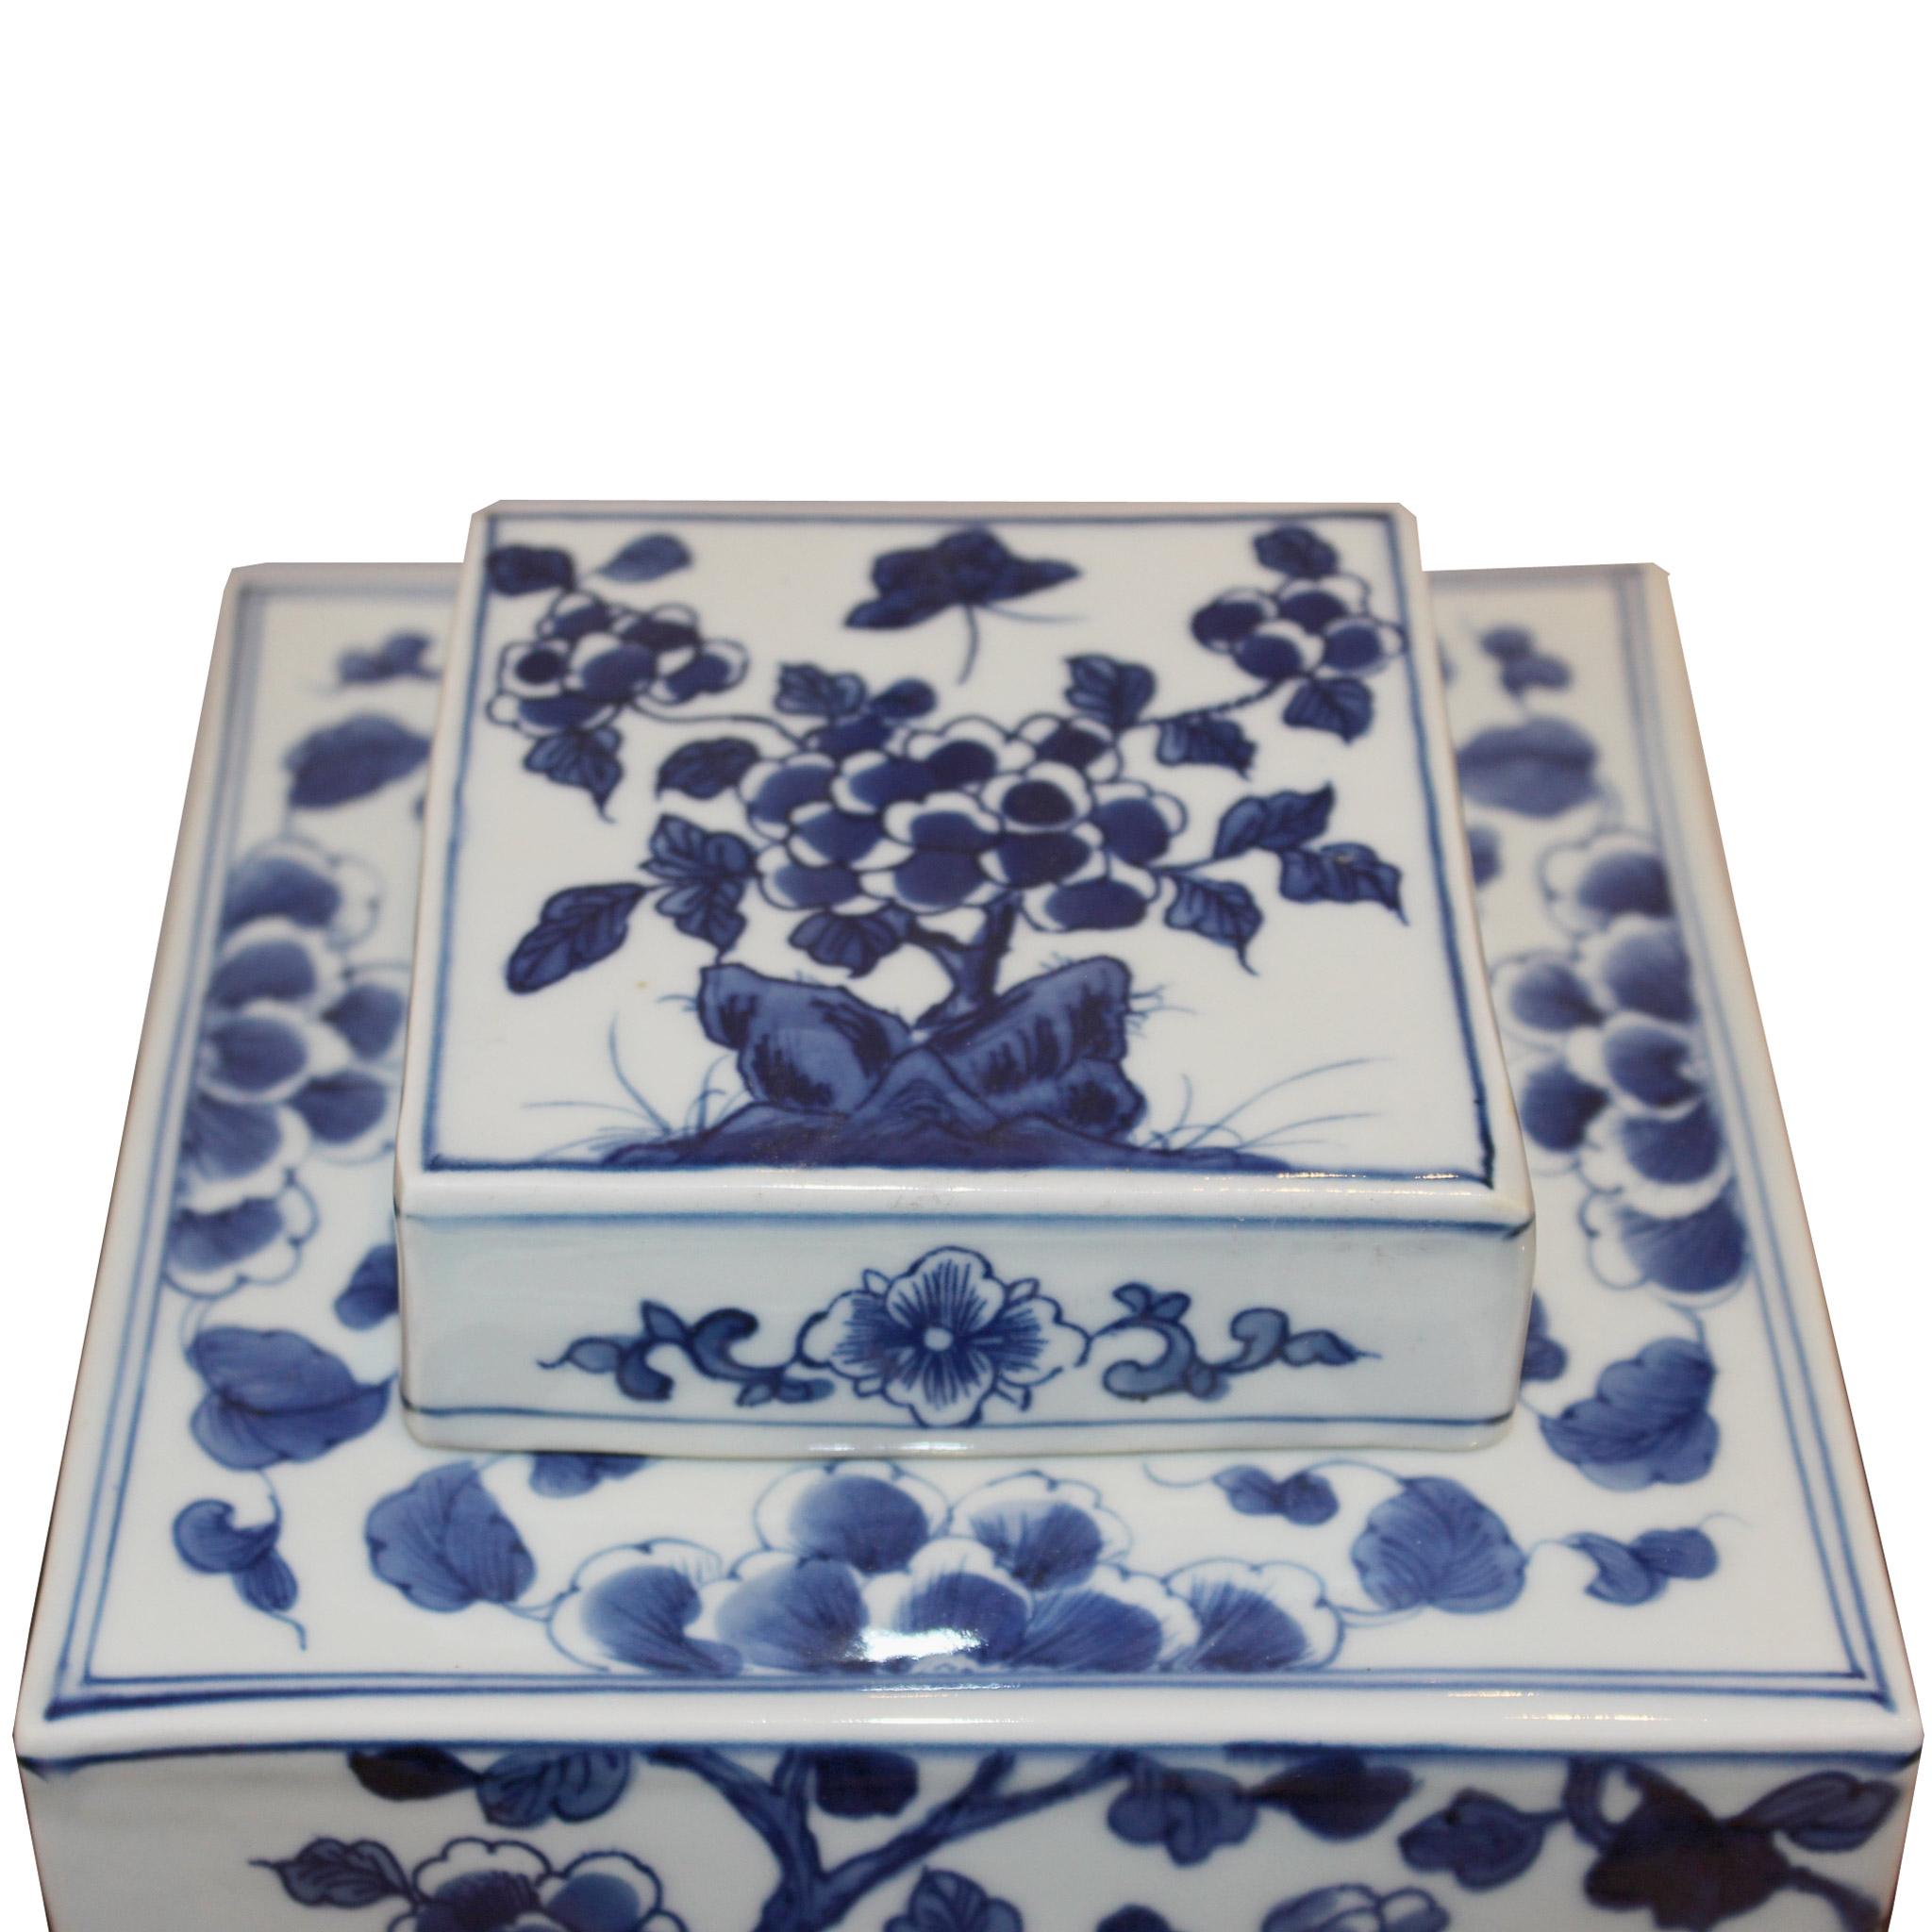 Blue and white ginger jar depicting flying birds around cherry blossom branches, symbolizing love and passion.  